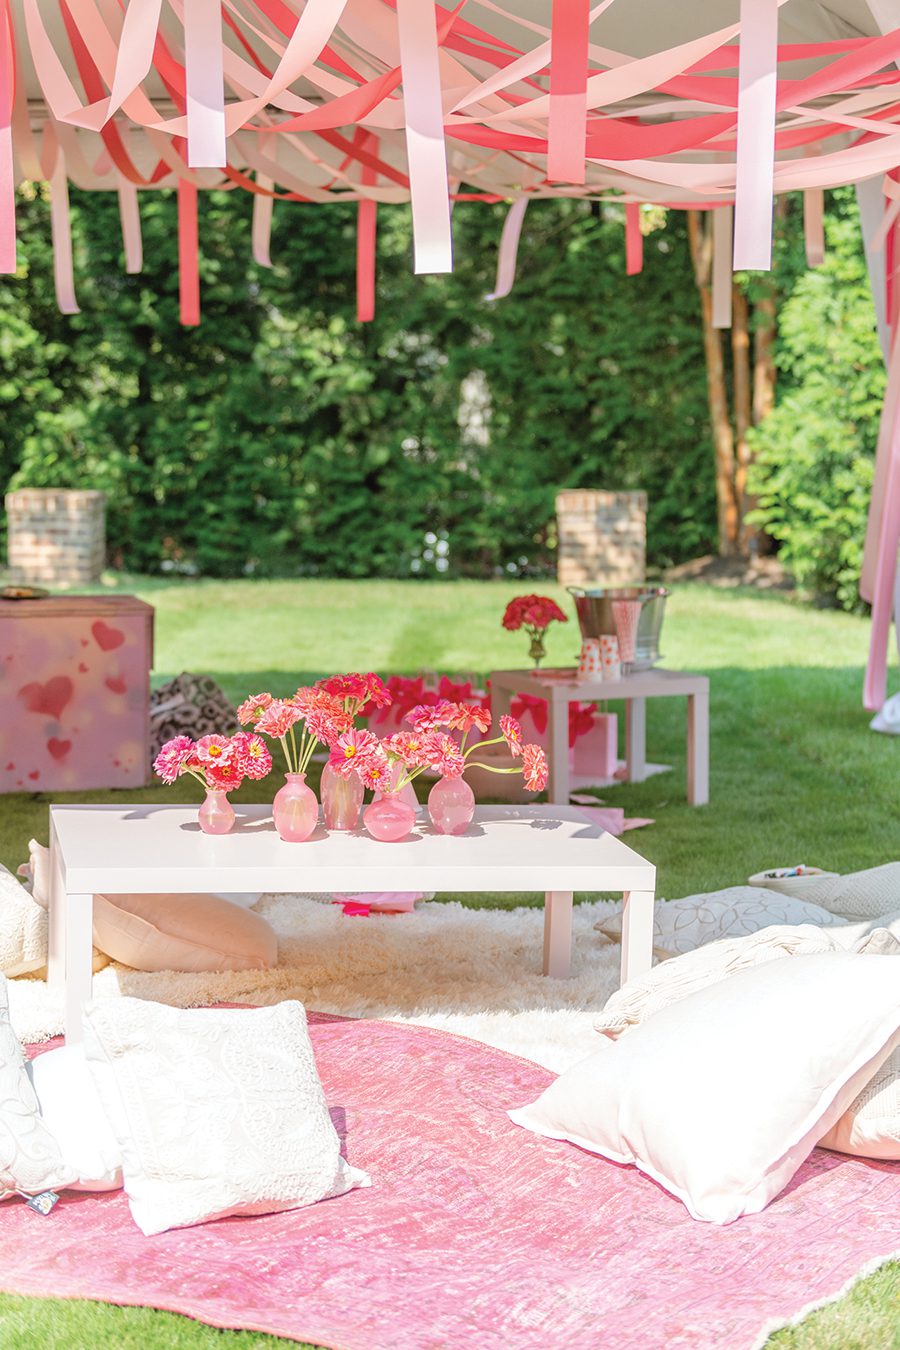 A white table with assorted vases of pink flowers, outside under pink streamers, on top of furry white blankets and white pillows